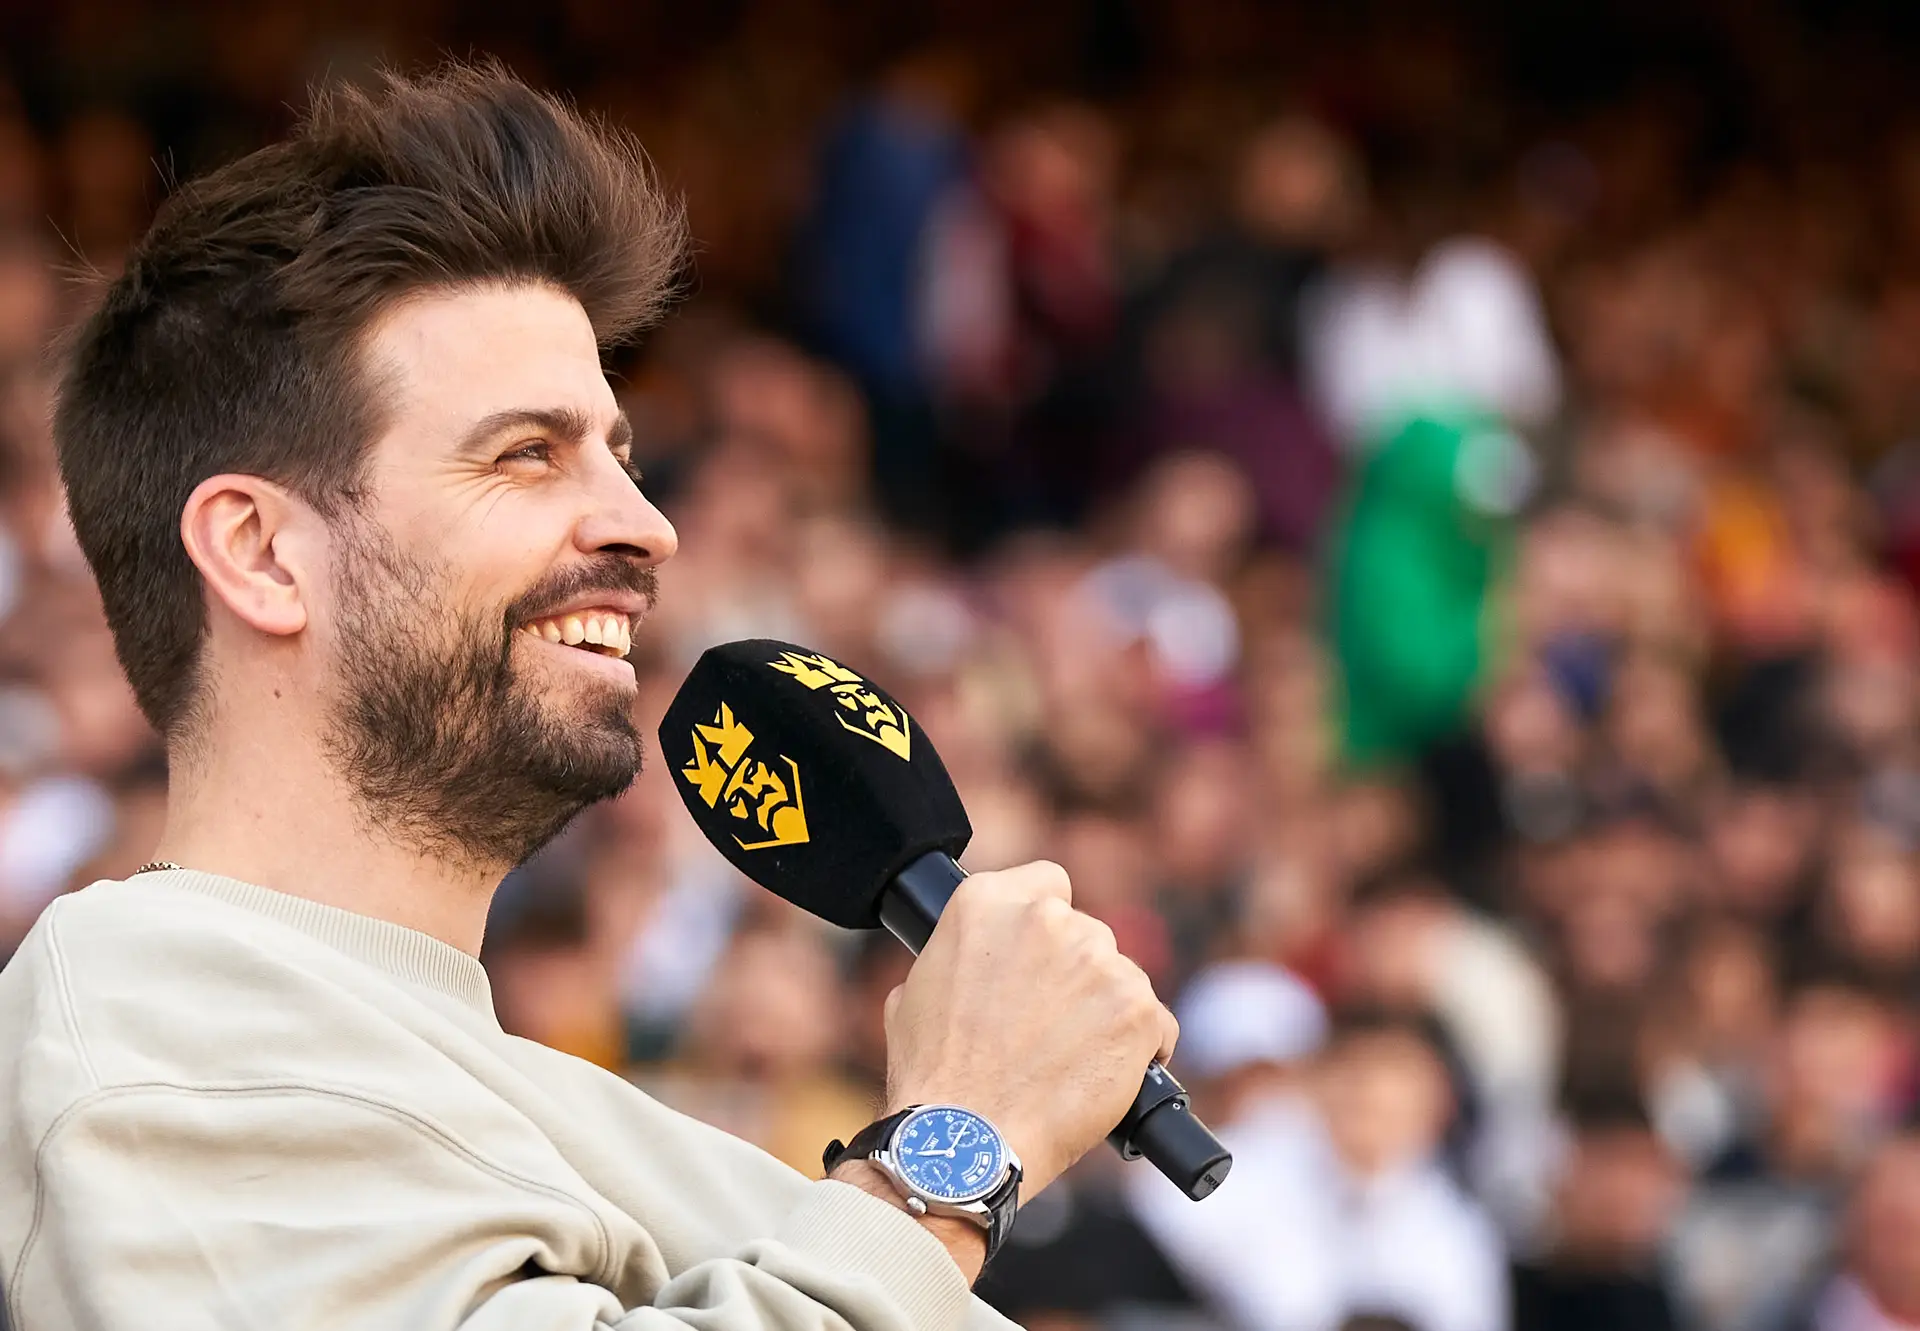 Kings League: Everything you need to know about Gerard Piqué's